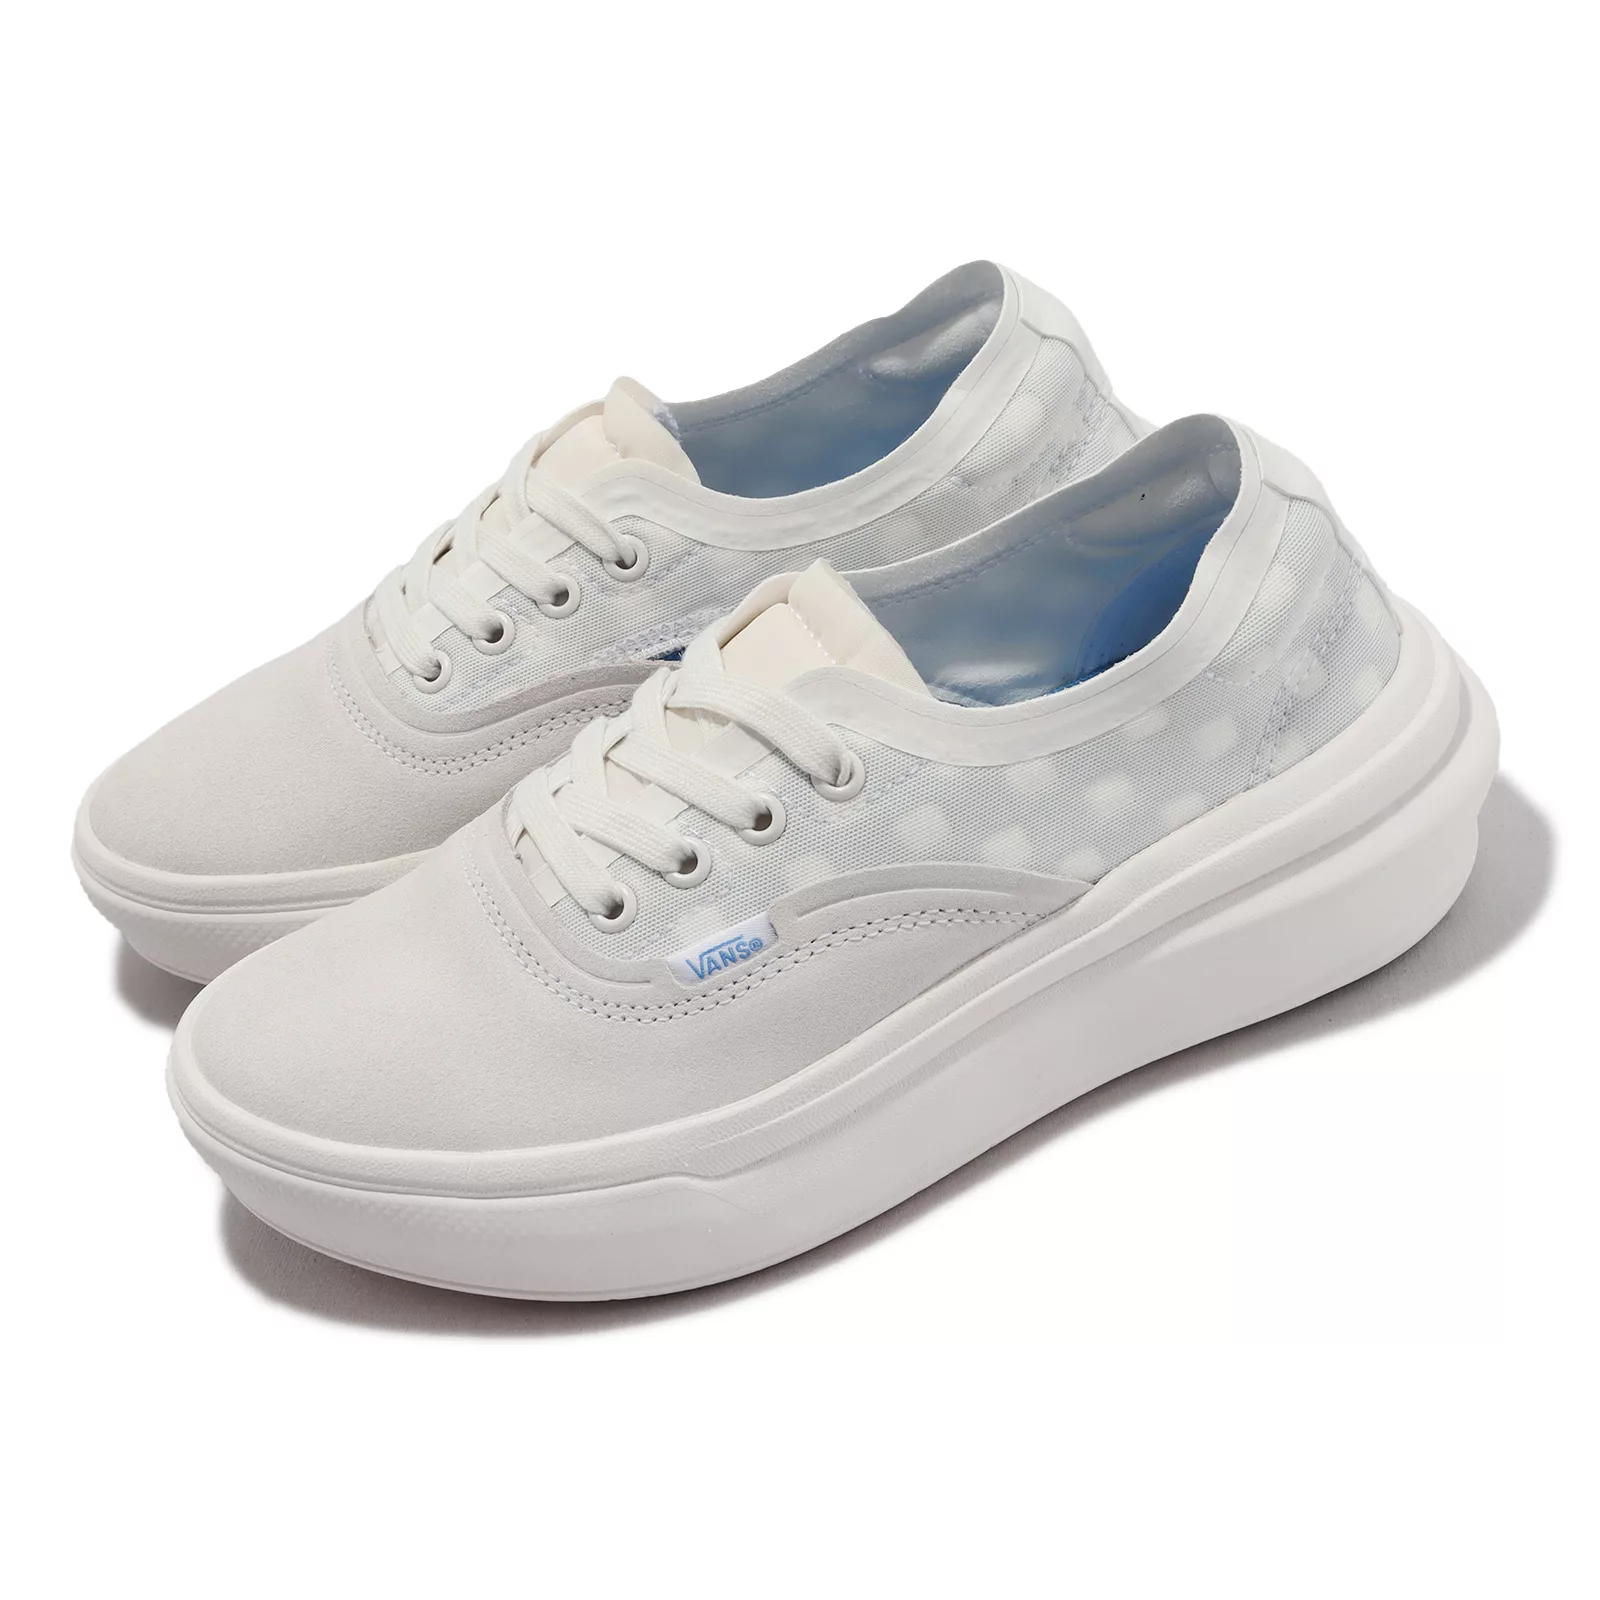 Vans 休閒鞋 Authentic Over 男鞋 女鞋 白 全白 厚底 增高 麂皮 經典 VN0007NVWWW